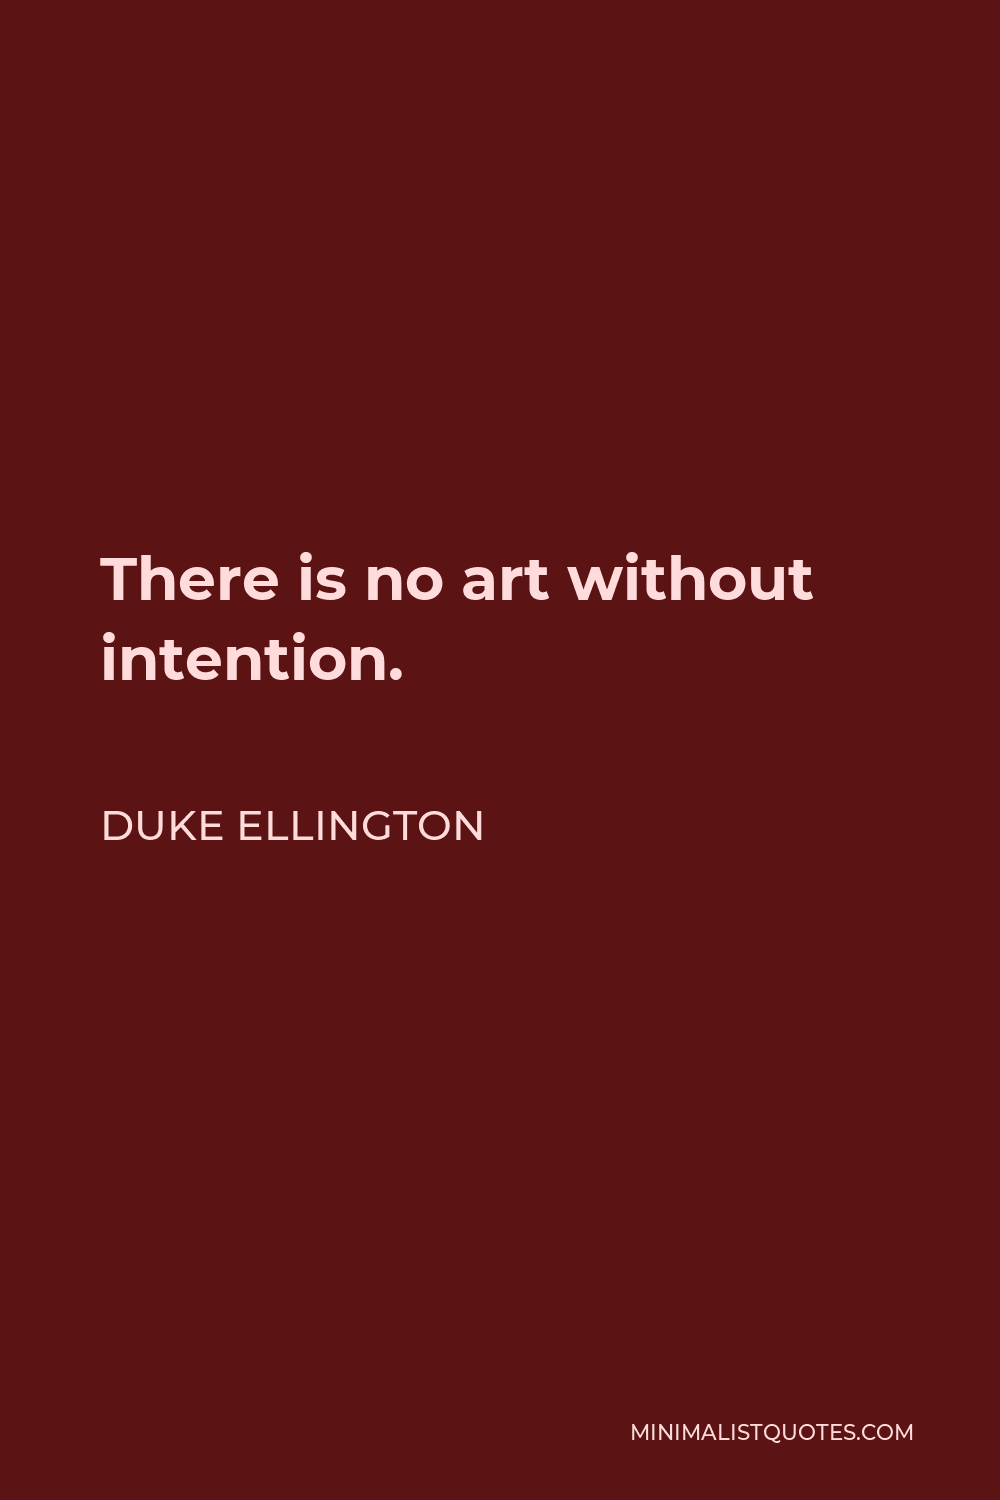 Duke Ellington Quote - There is no art without intention.